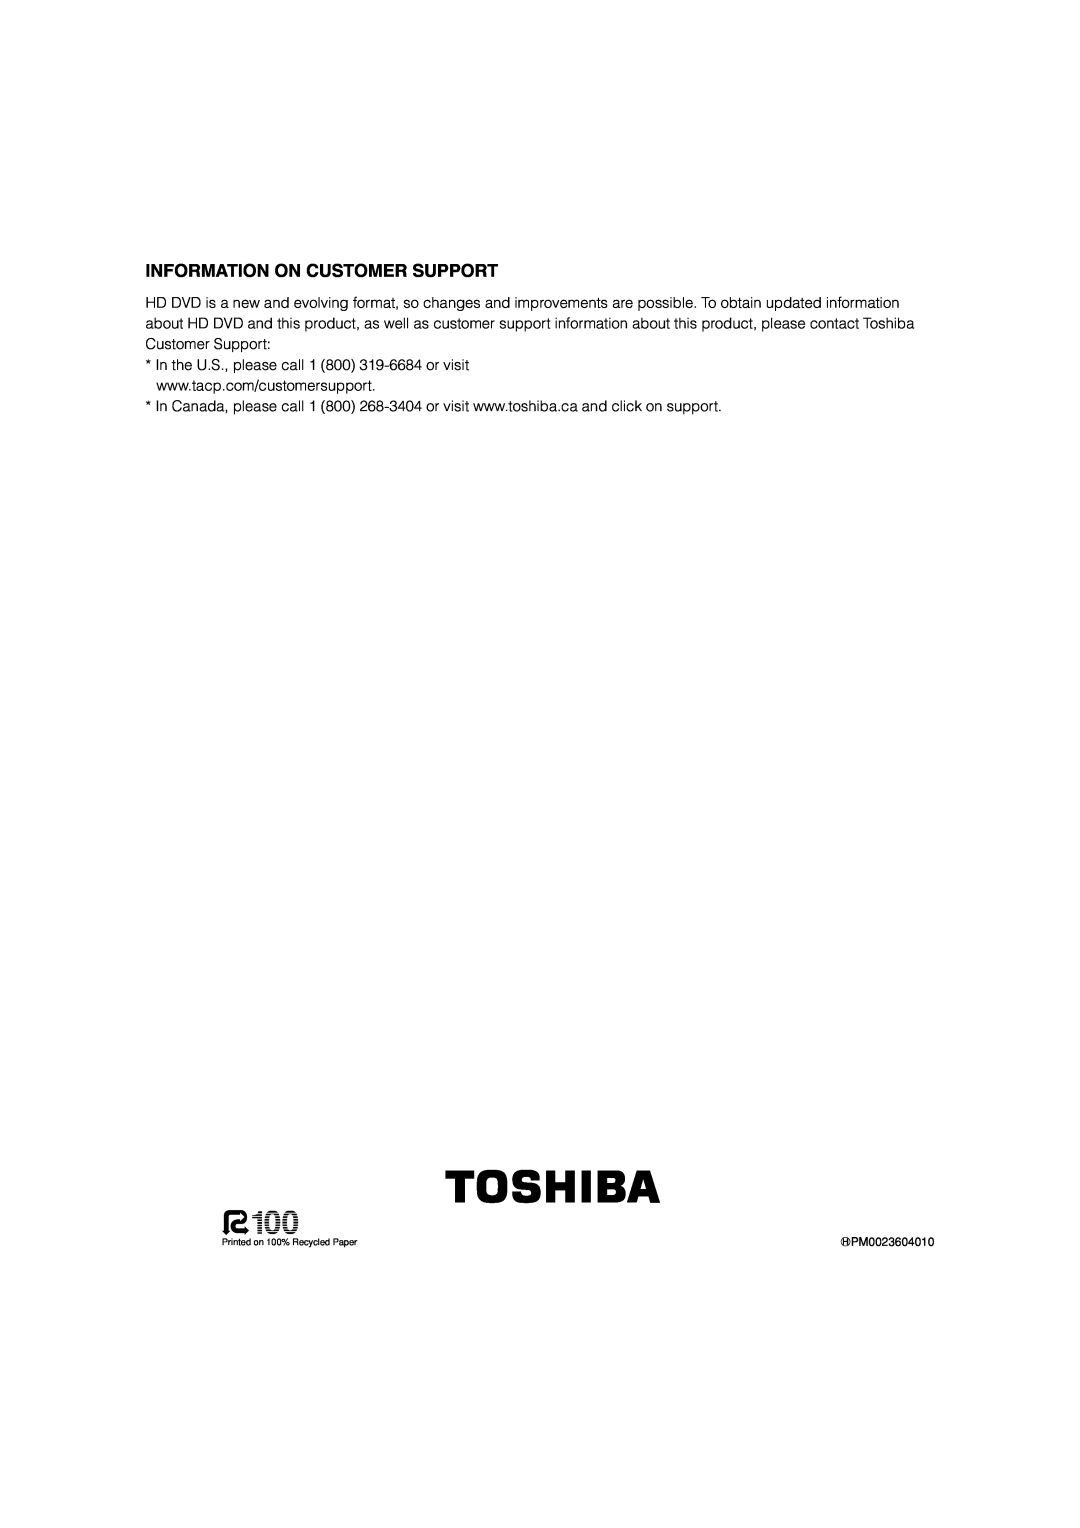 Toshiba HD-D1, HD-A1 owner manual Information On Customer Support, PM0023604010, Printed on 100% Recycled Paper 